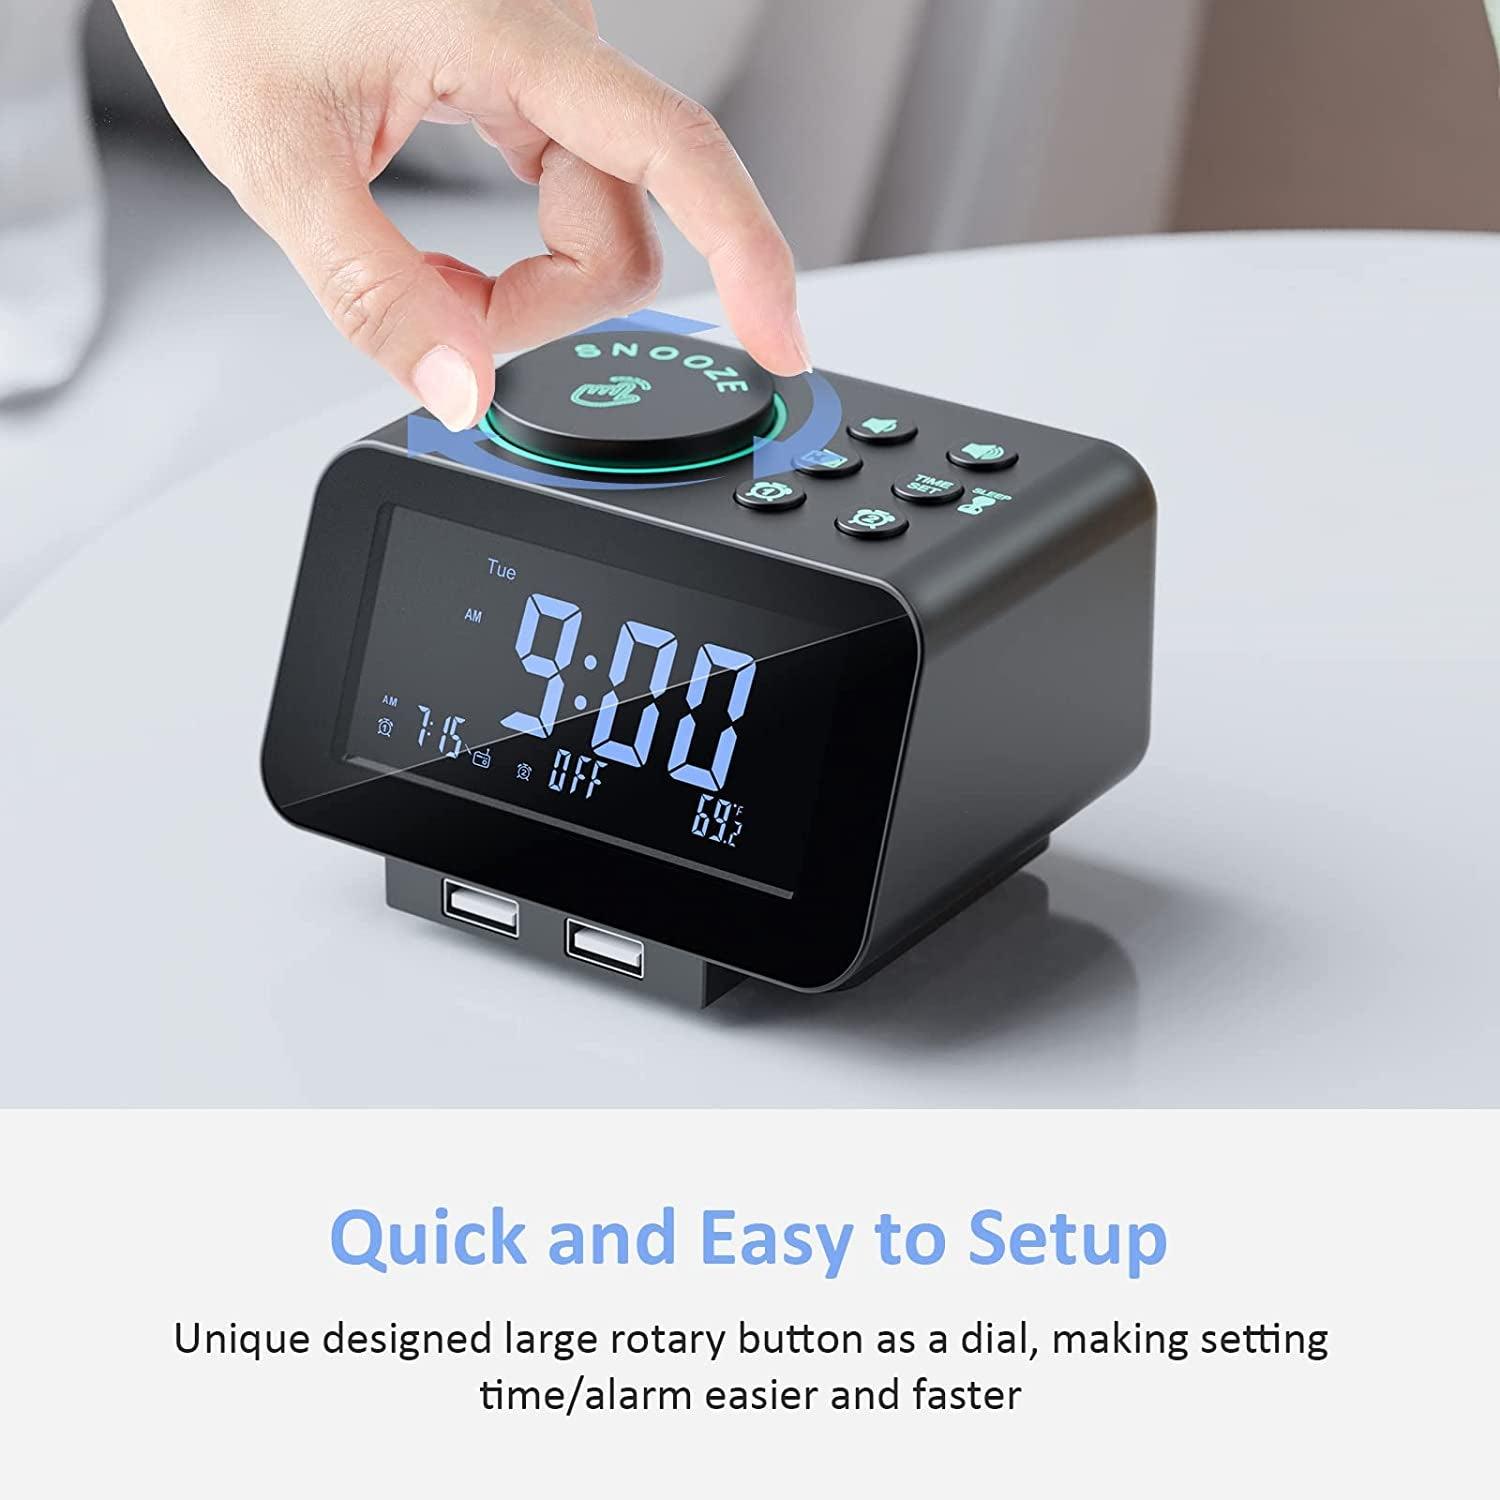 Digital Alarm Clock Radio - 0-100% Dimmer, Dual Alarm with Weekday/Weekend Mode, 6 Sounds Adjustable Volume, FM Radio W/Sleep Timer, Snooze, 2 USB Charging Ports, Thermometer, Battery Backup